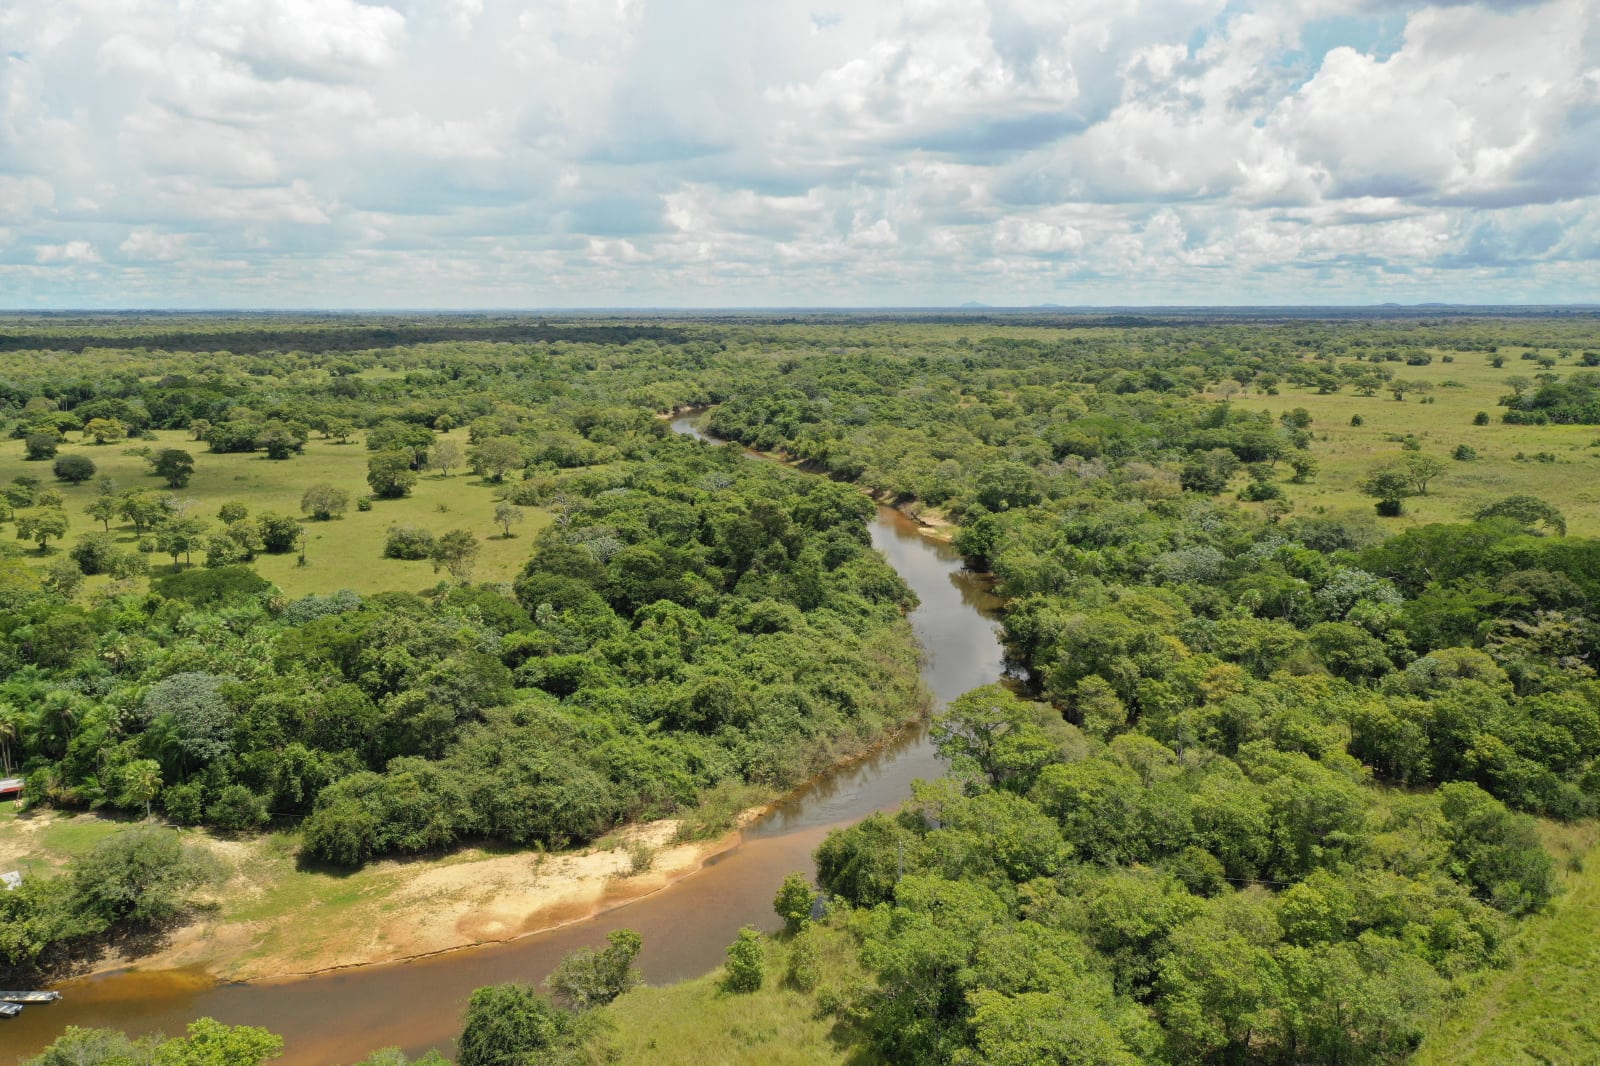 The best time to visit the Pantanal - Bonito Way